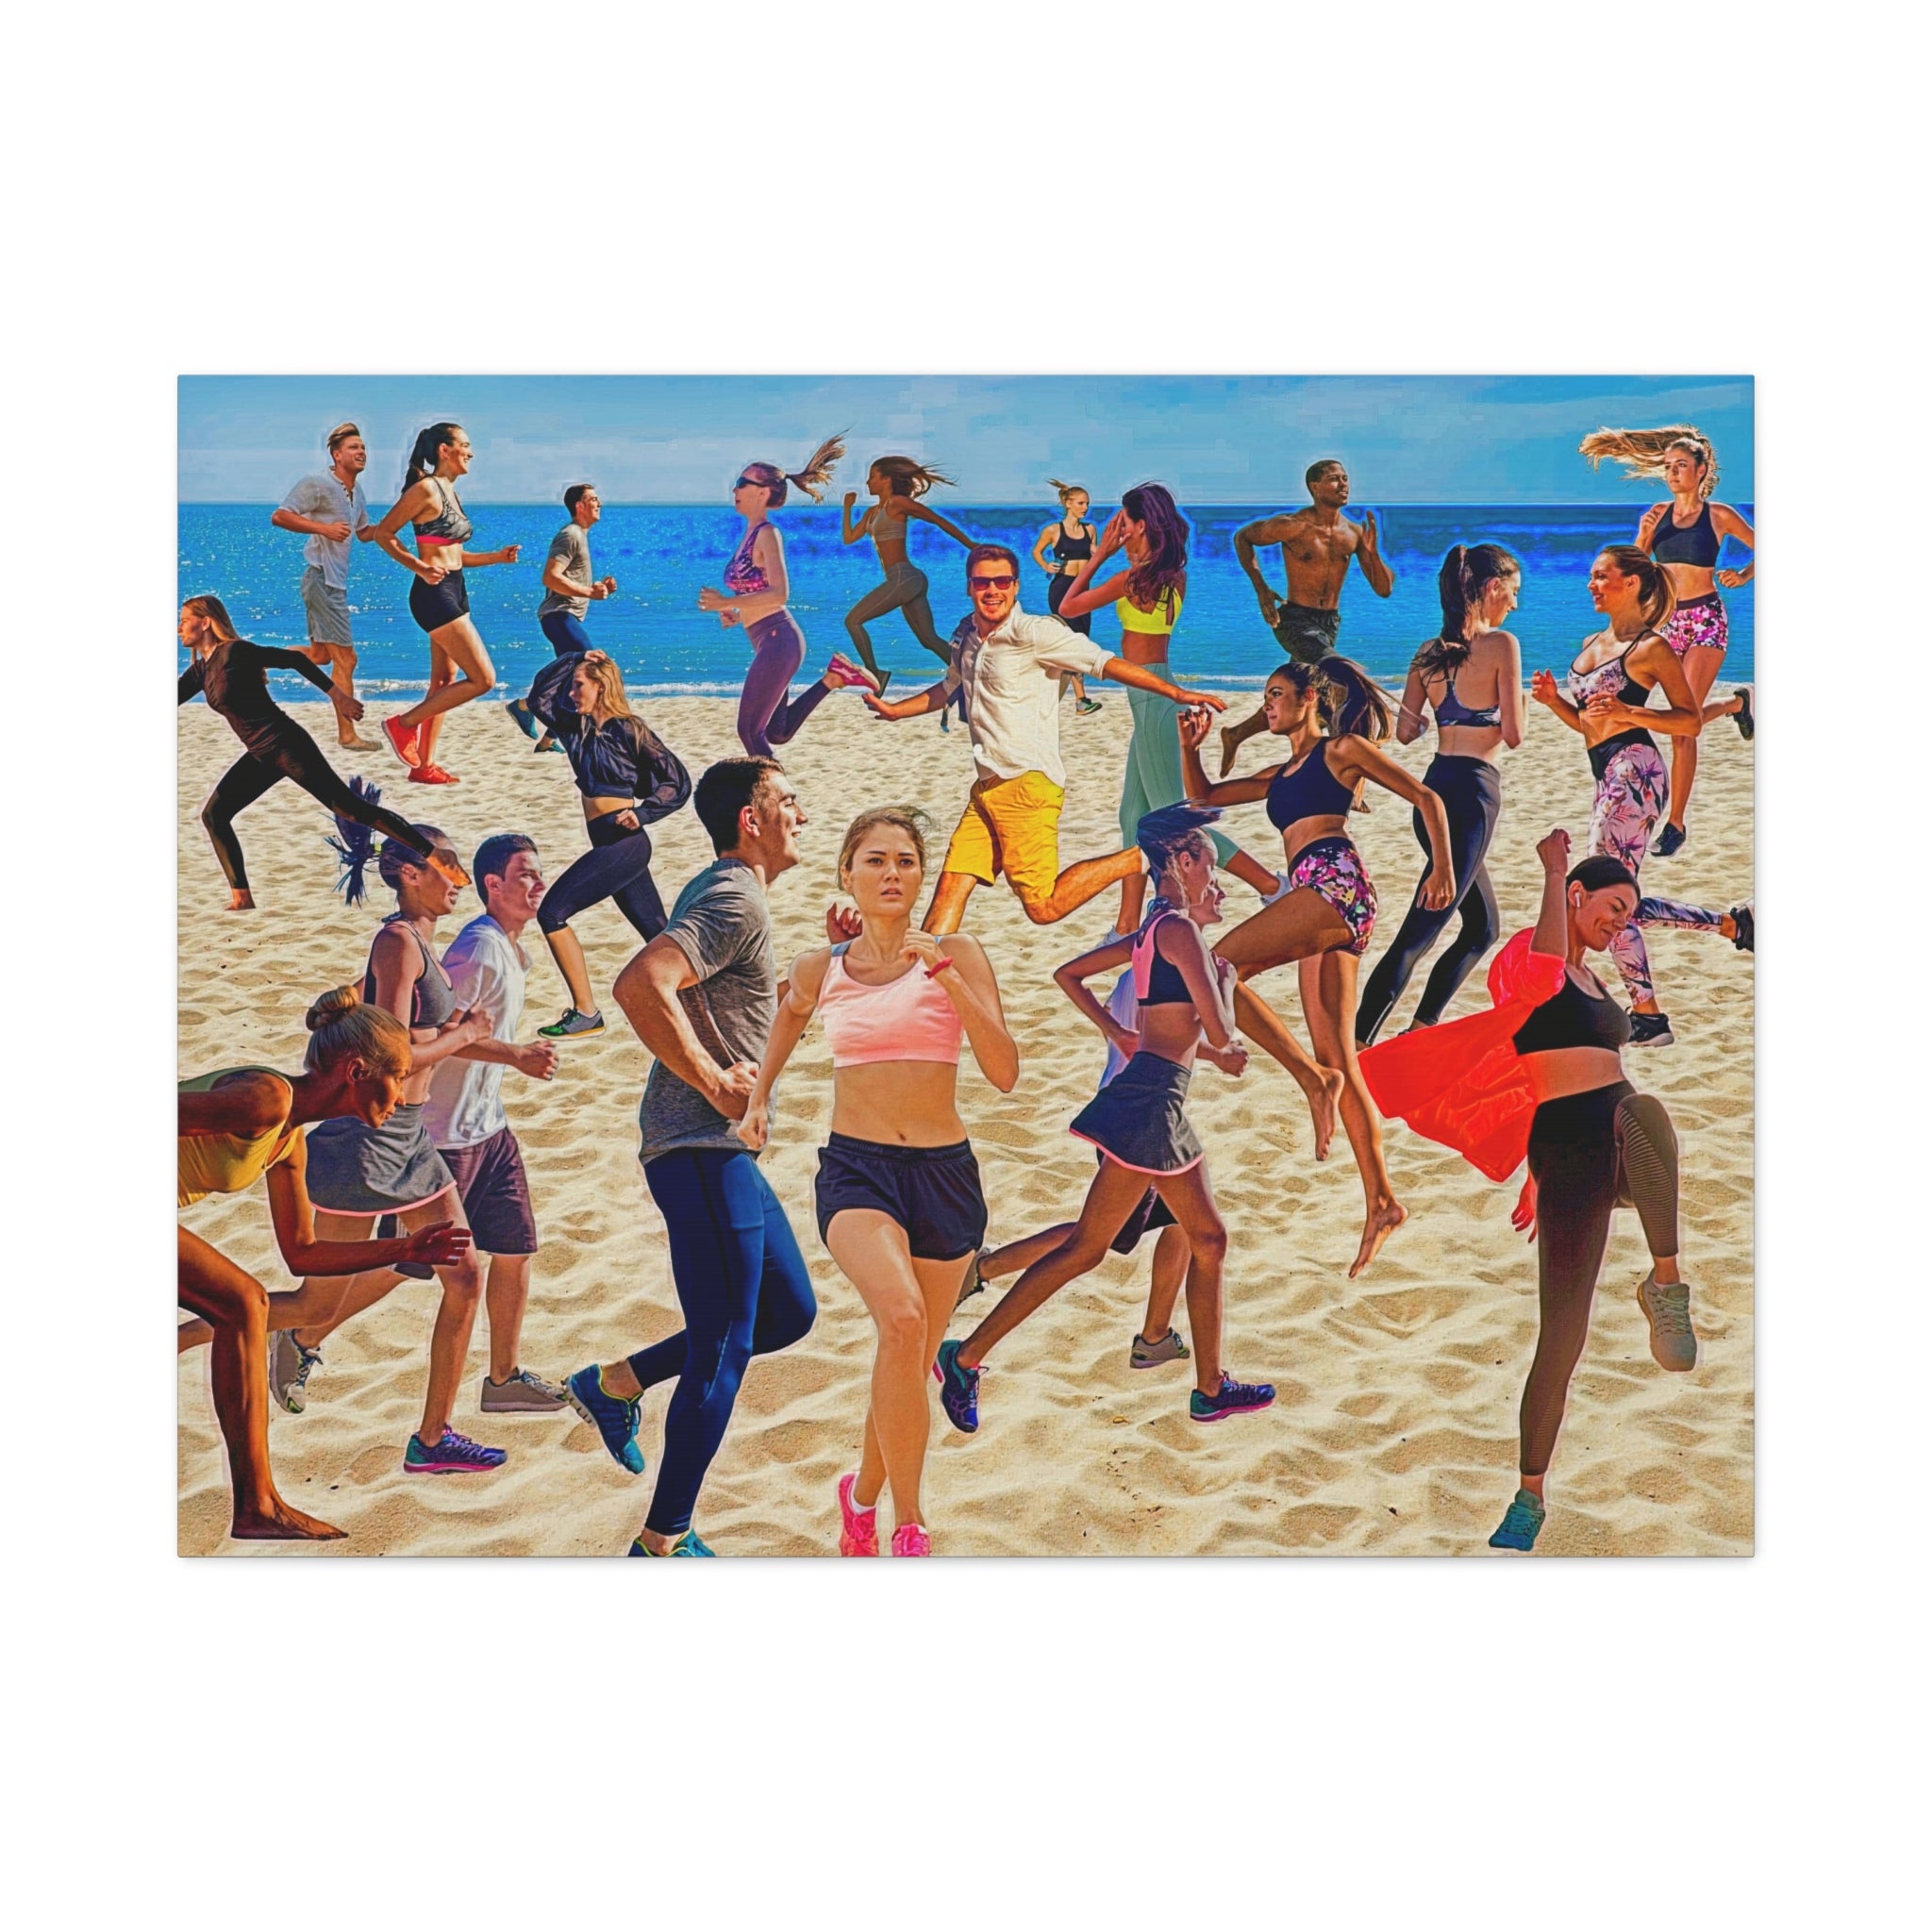 Wall Art Canvas BEACH RUNNERS Sport Print Painting Original Giclee Nice Beauty Ocean Blue Water Sand Fun Design Fit Red Hot House Home Living Office Gift Ready to Hang